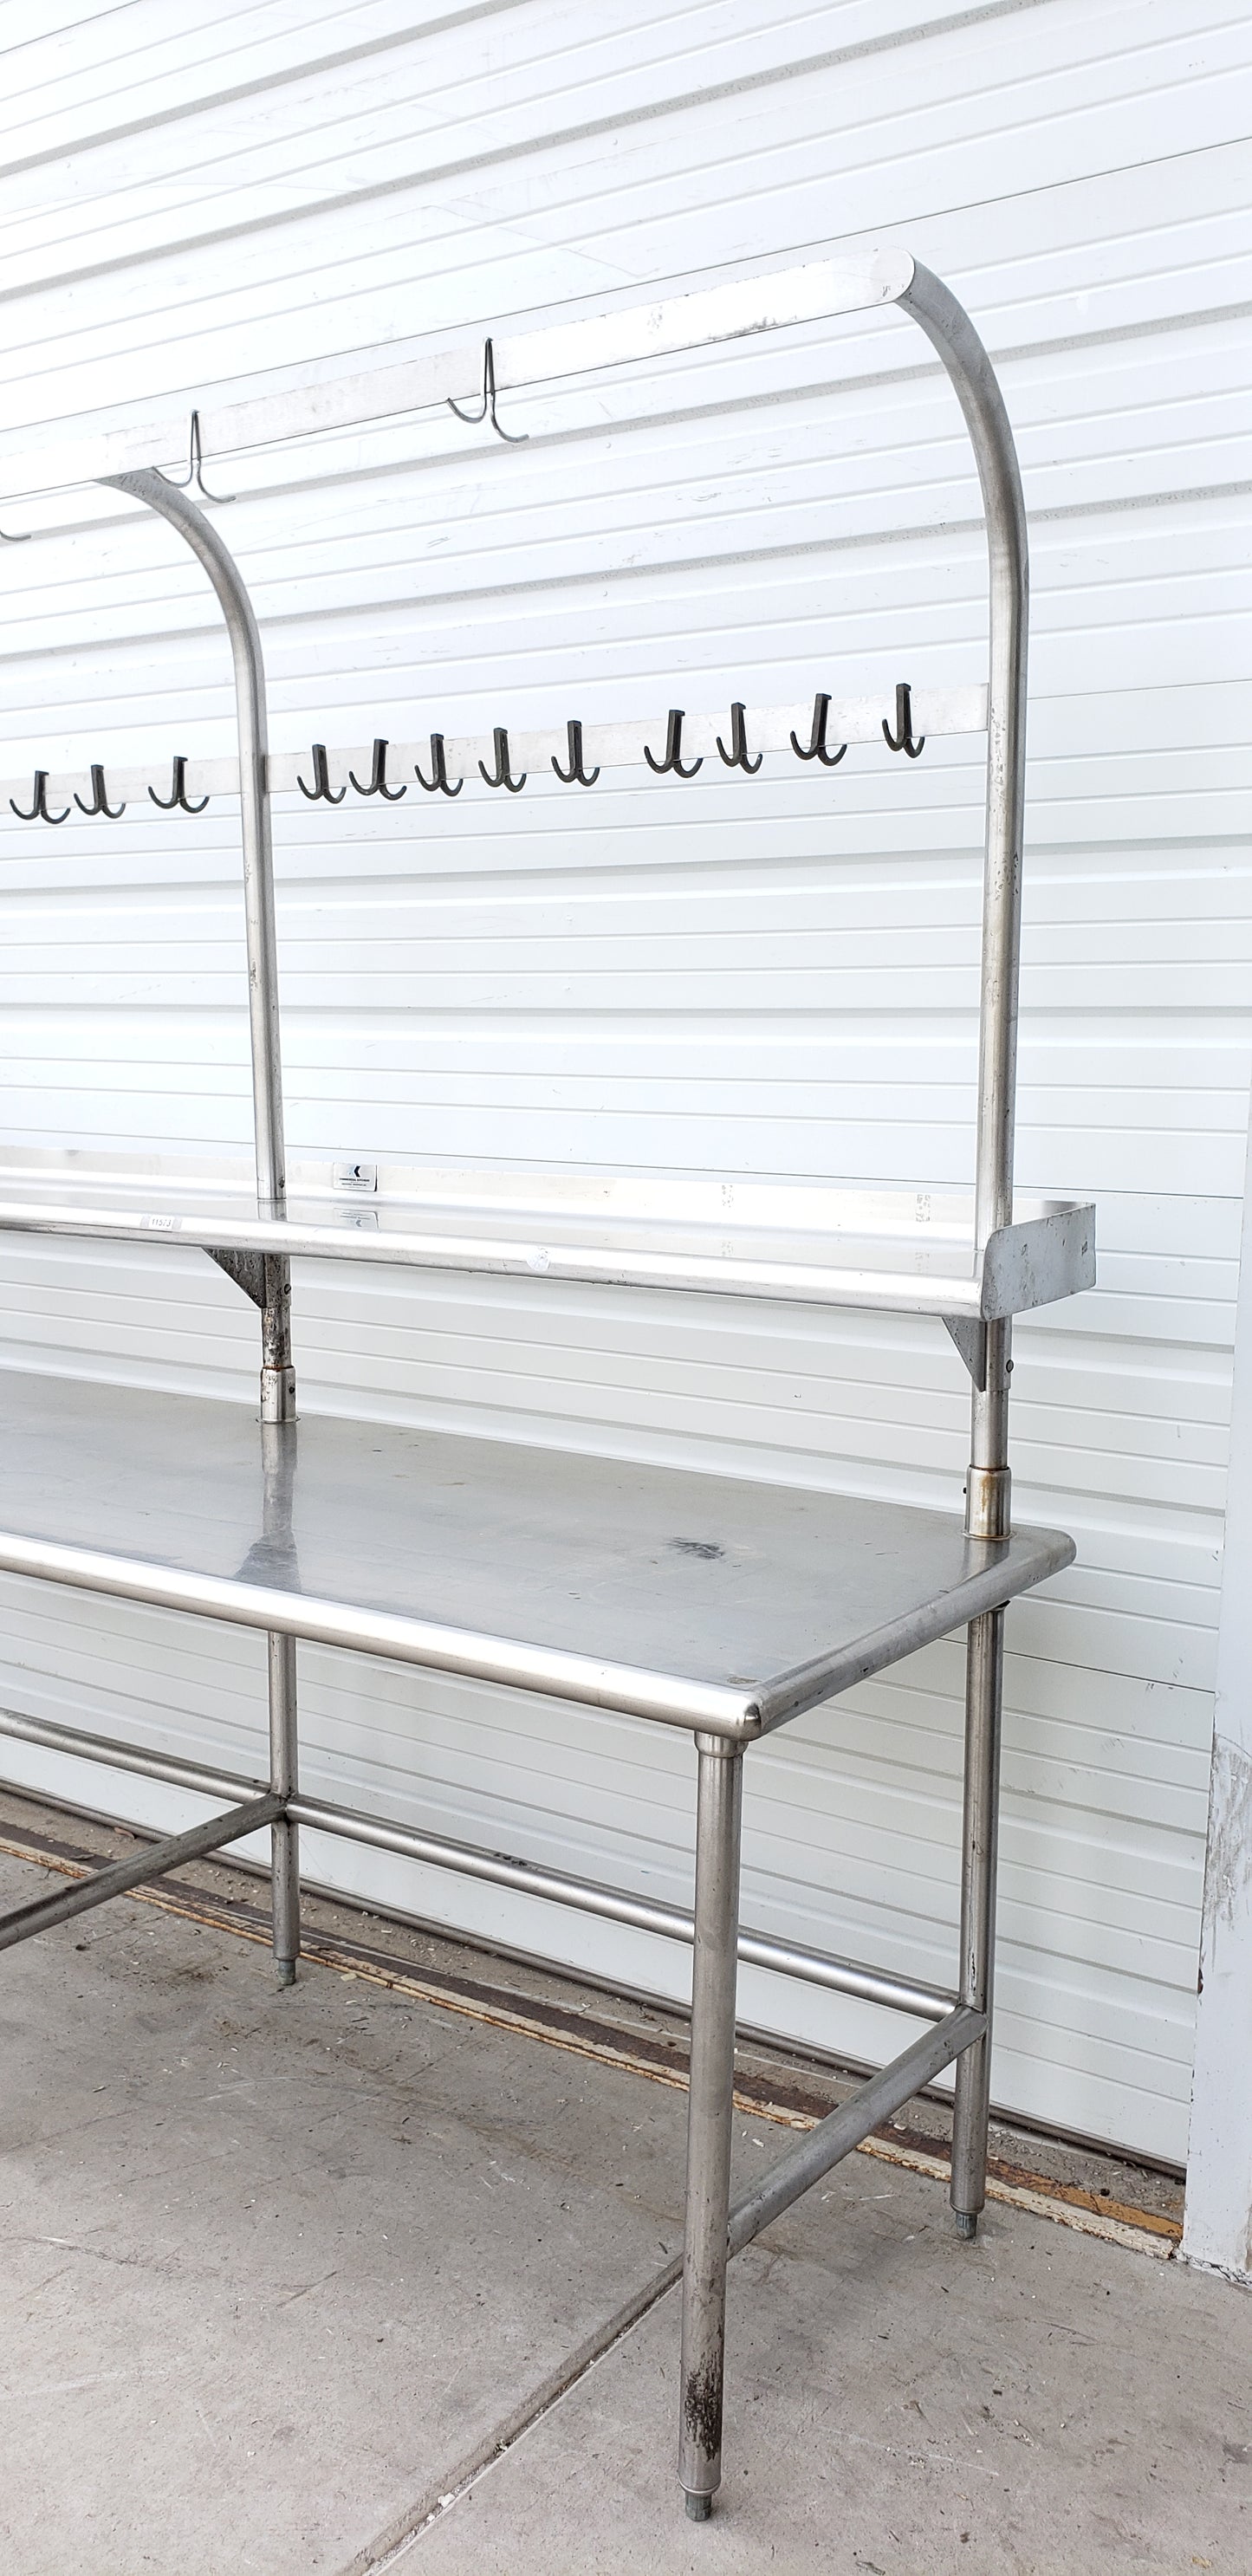 Stainless Steel Sink / Pot Rack Table